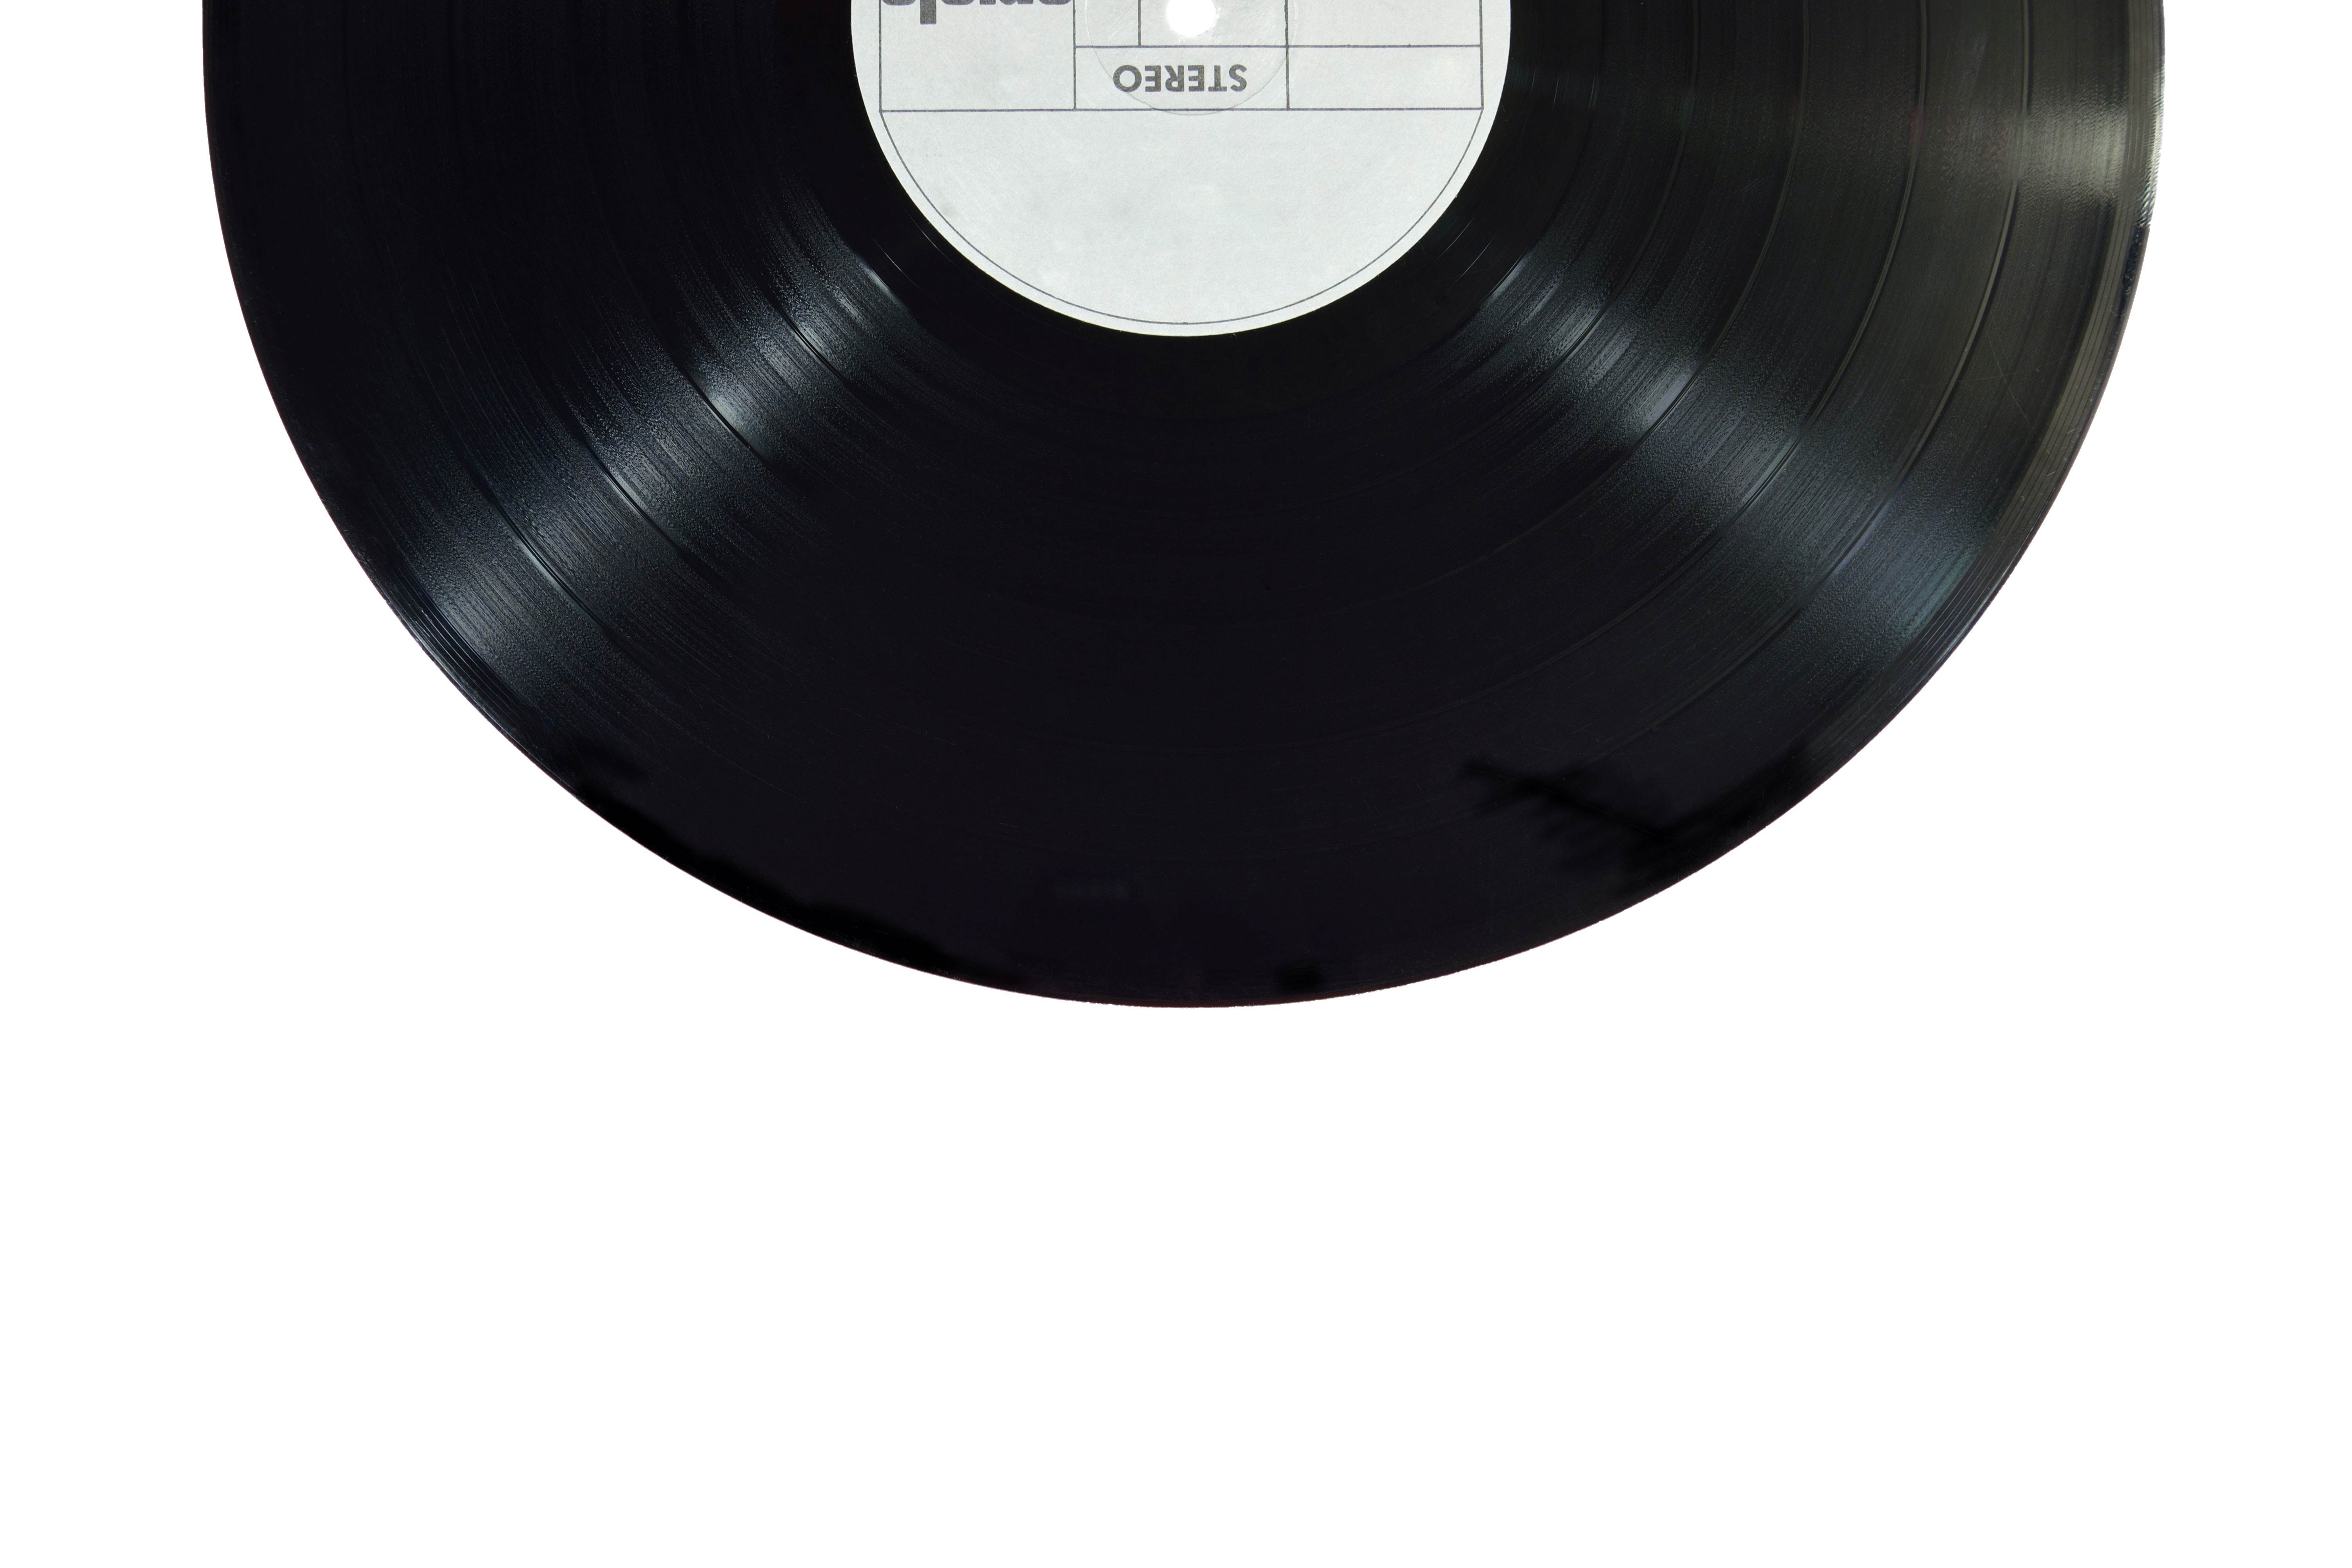 File:I Want You by Marvin Gaye A-side US vinyl 1976.png - Wikimedia Commons